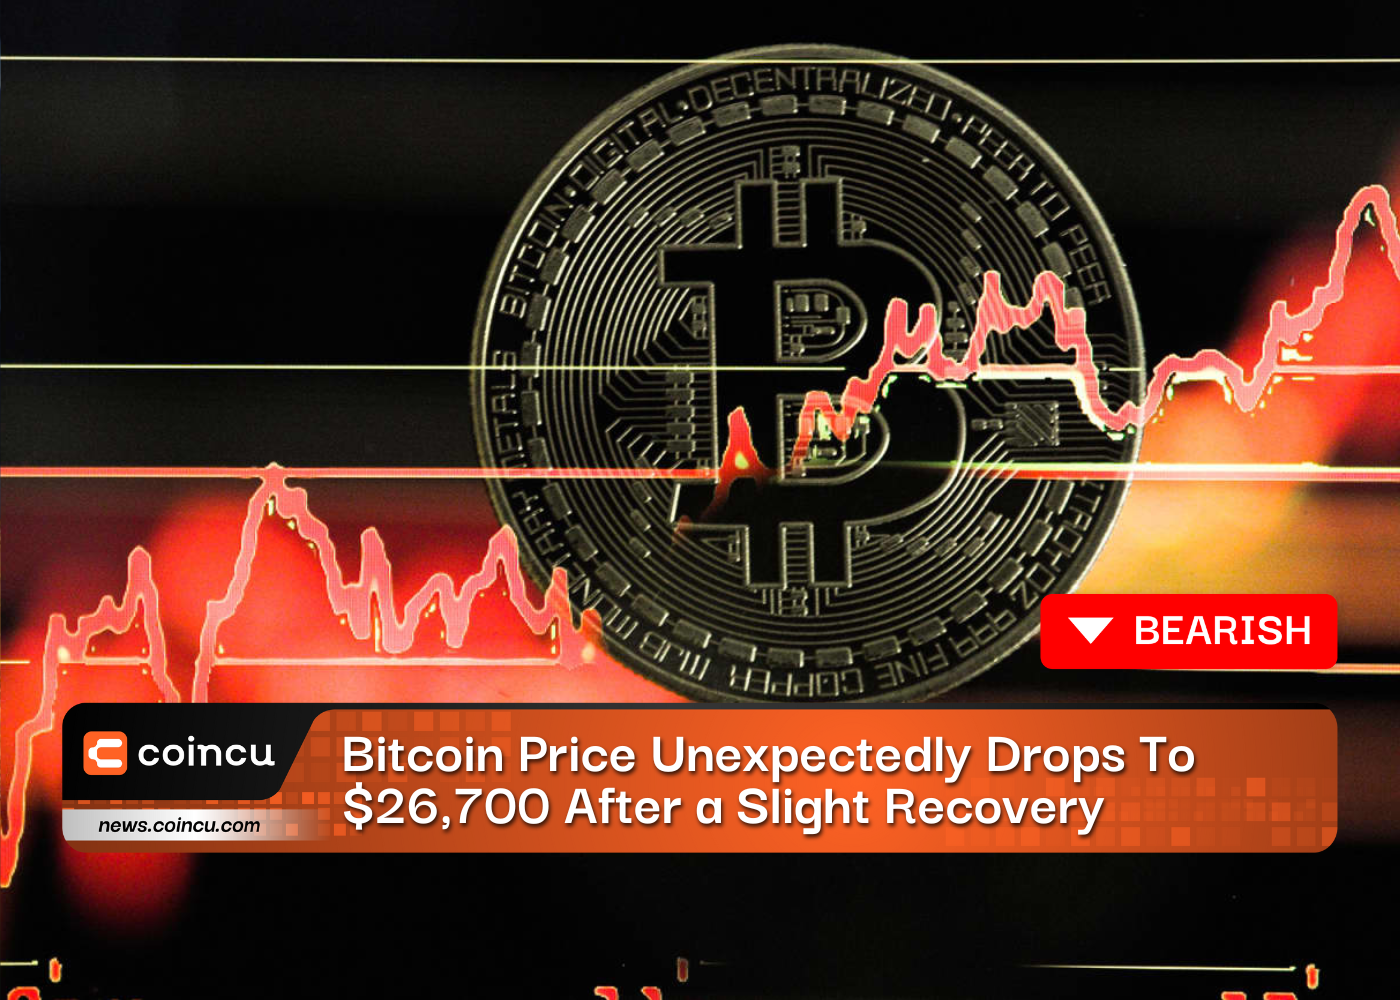 Bitcoin Price Unexpectedly Drops To $26,700 After A Slight Recovery